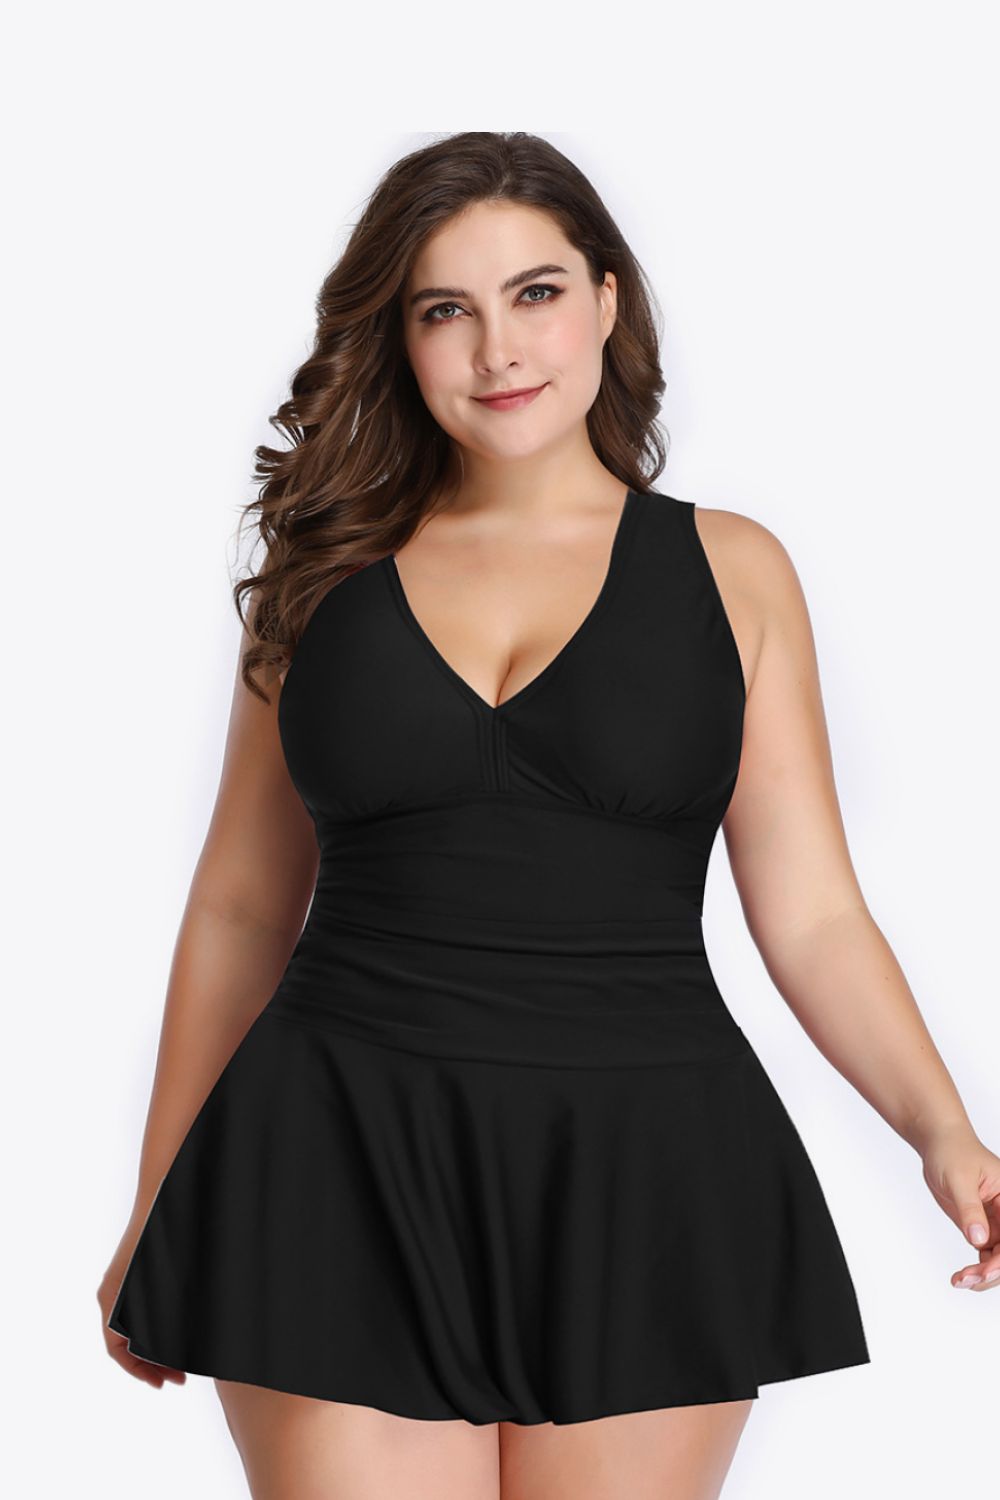 Elegant Plus Size Plunge Swim Dress - Perfect for Beach Weddings, Stylish Wedding Guest Outfit for Plus Size Women